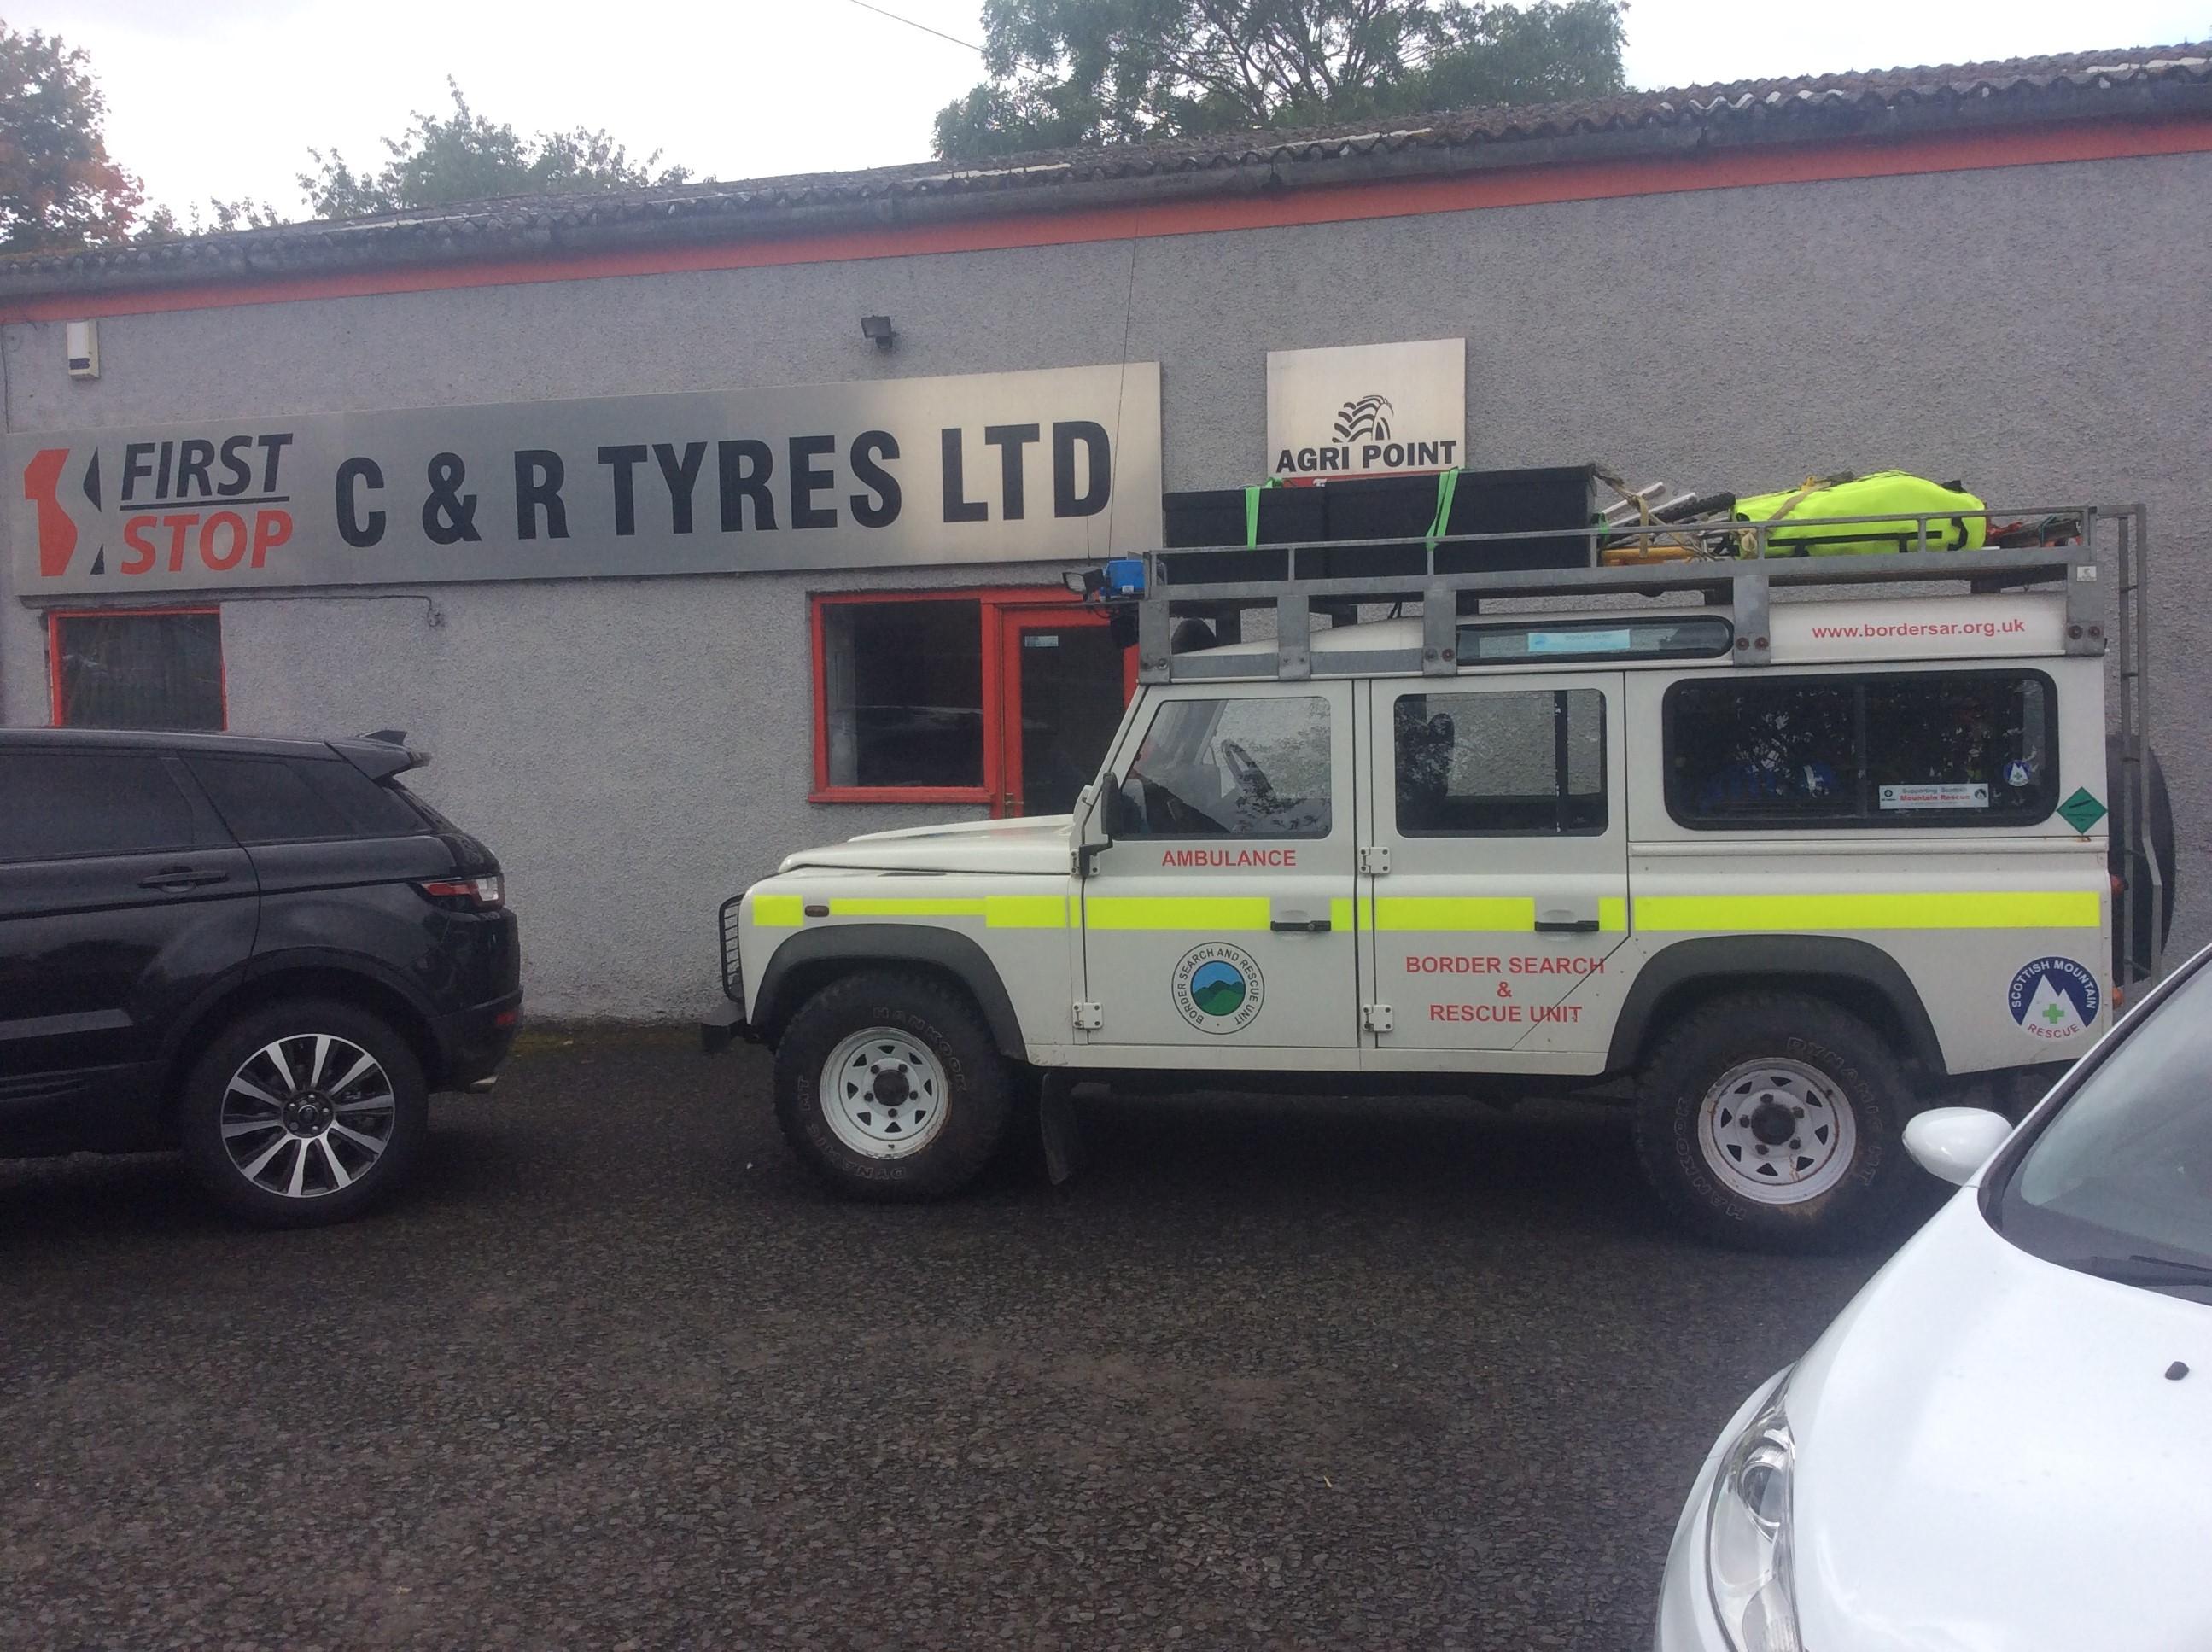 C&R Tyres keeping us on the road!